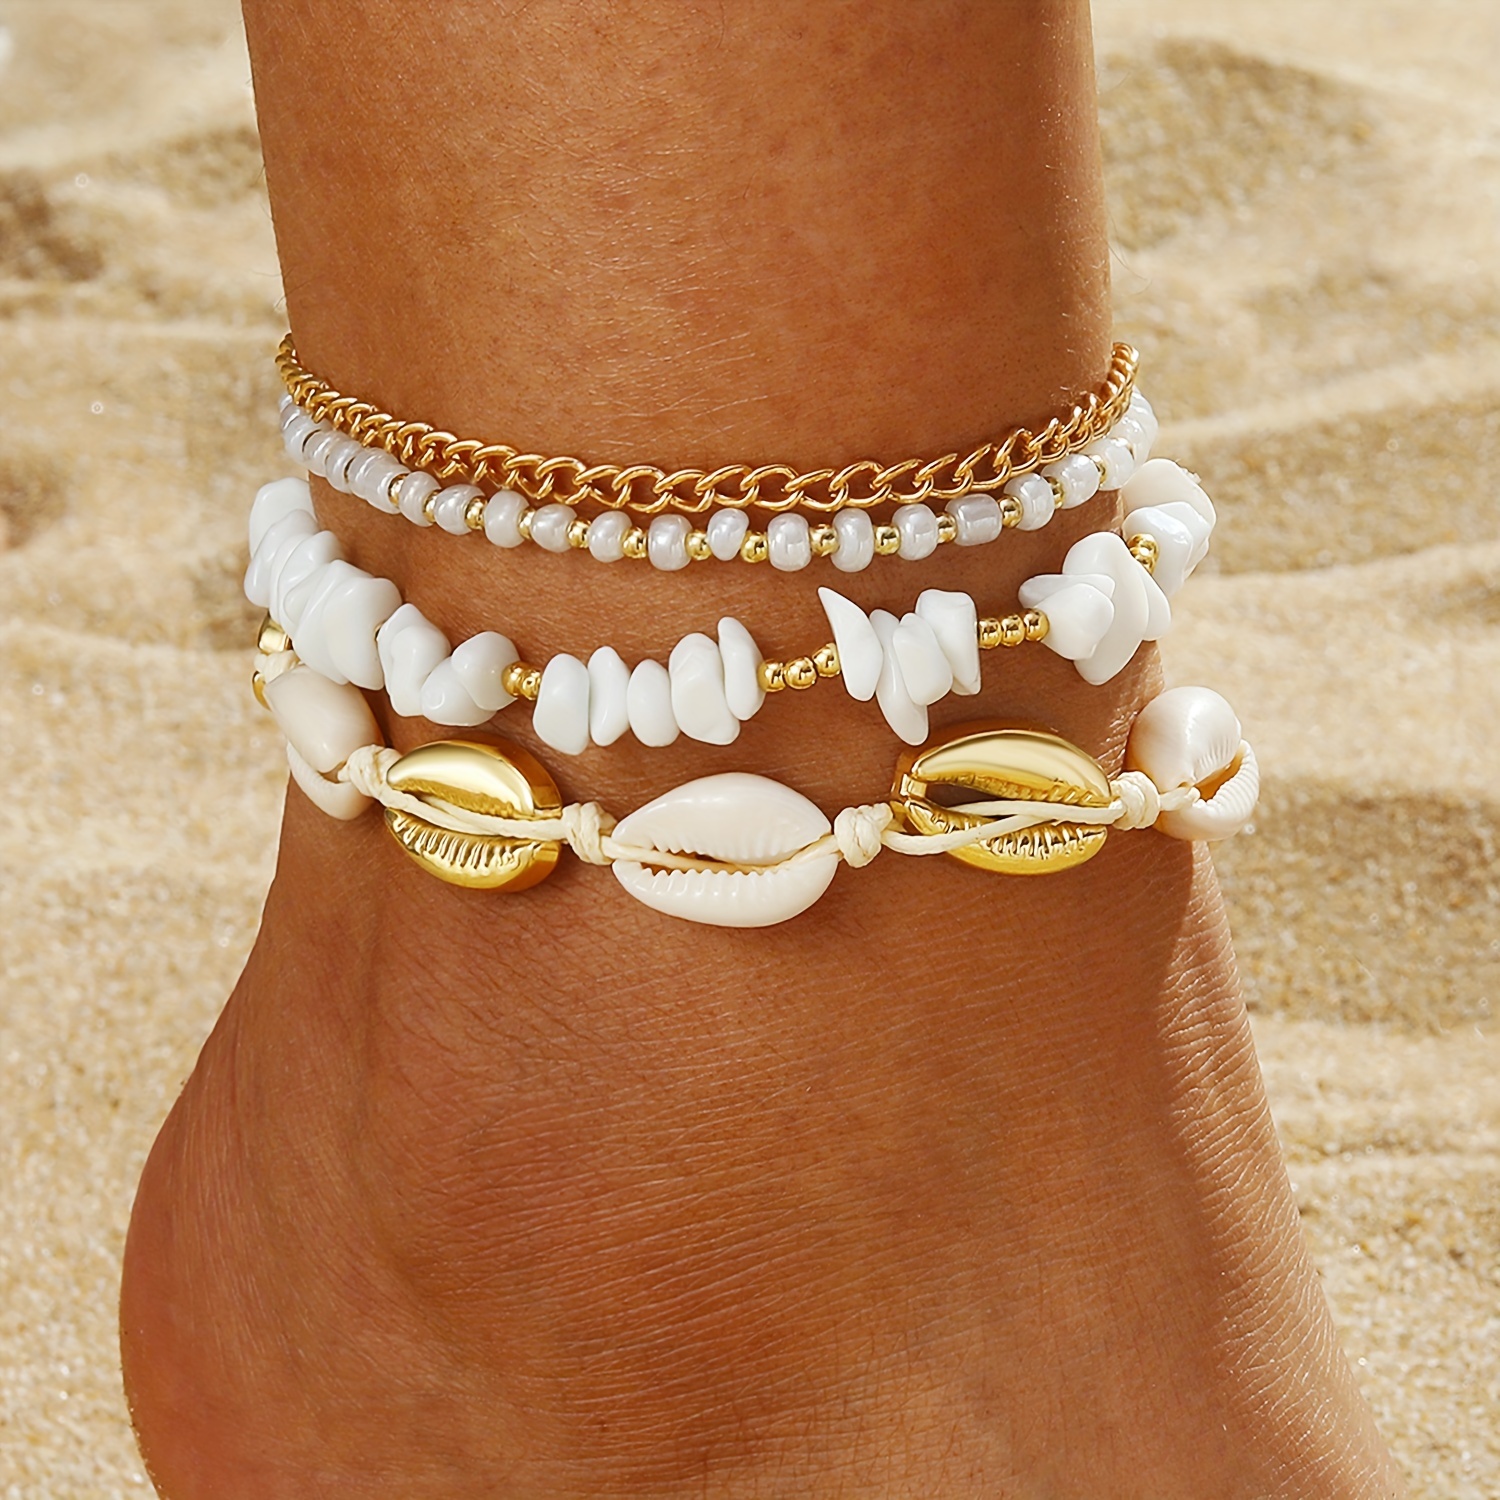 

4 Pcs Set Of Female Anklet With Imitation Shell Stones Design Bohemian Elegant Style For Women Vocation Party